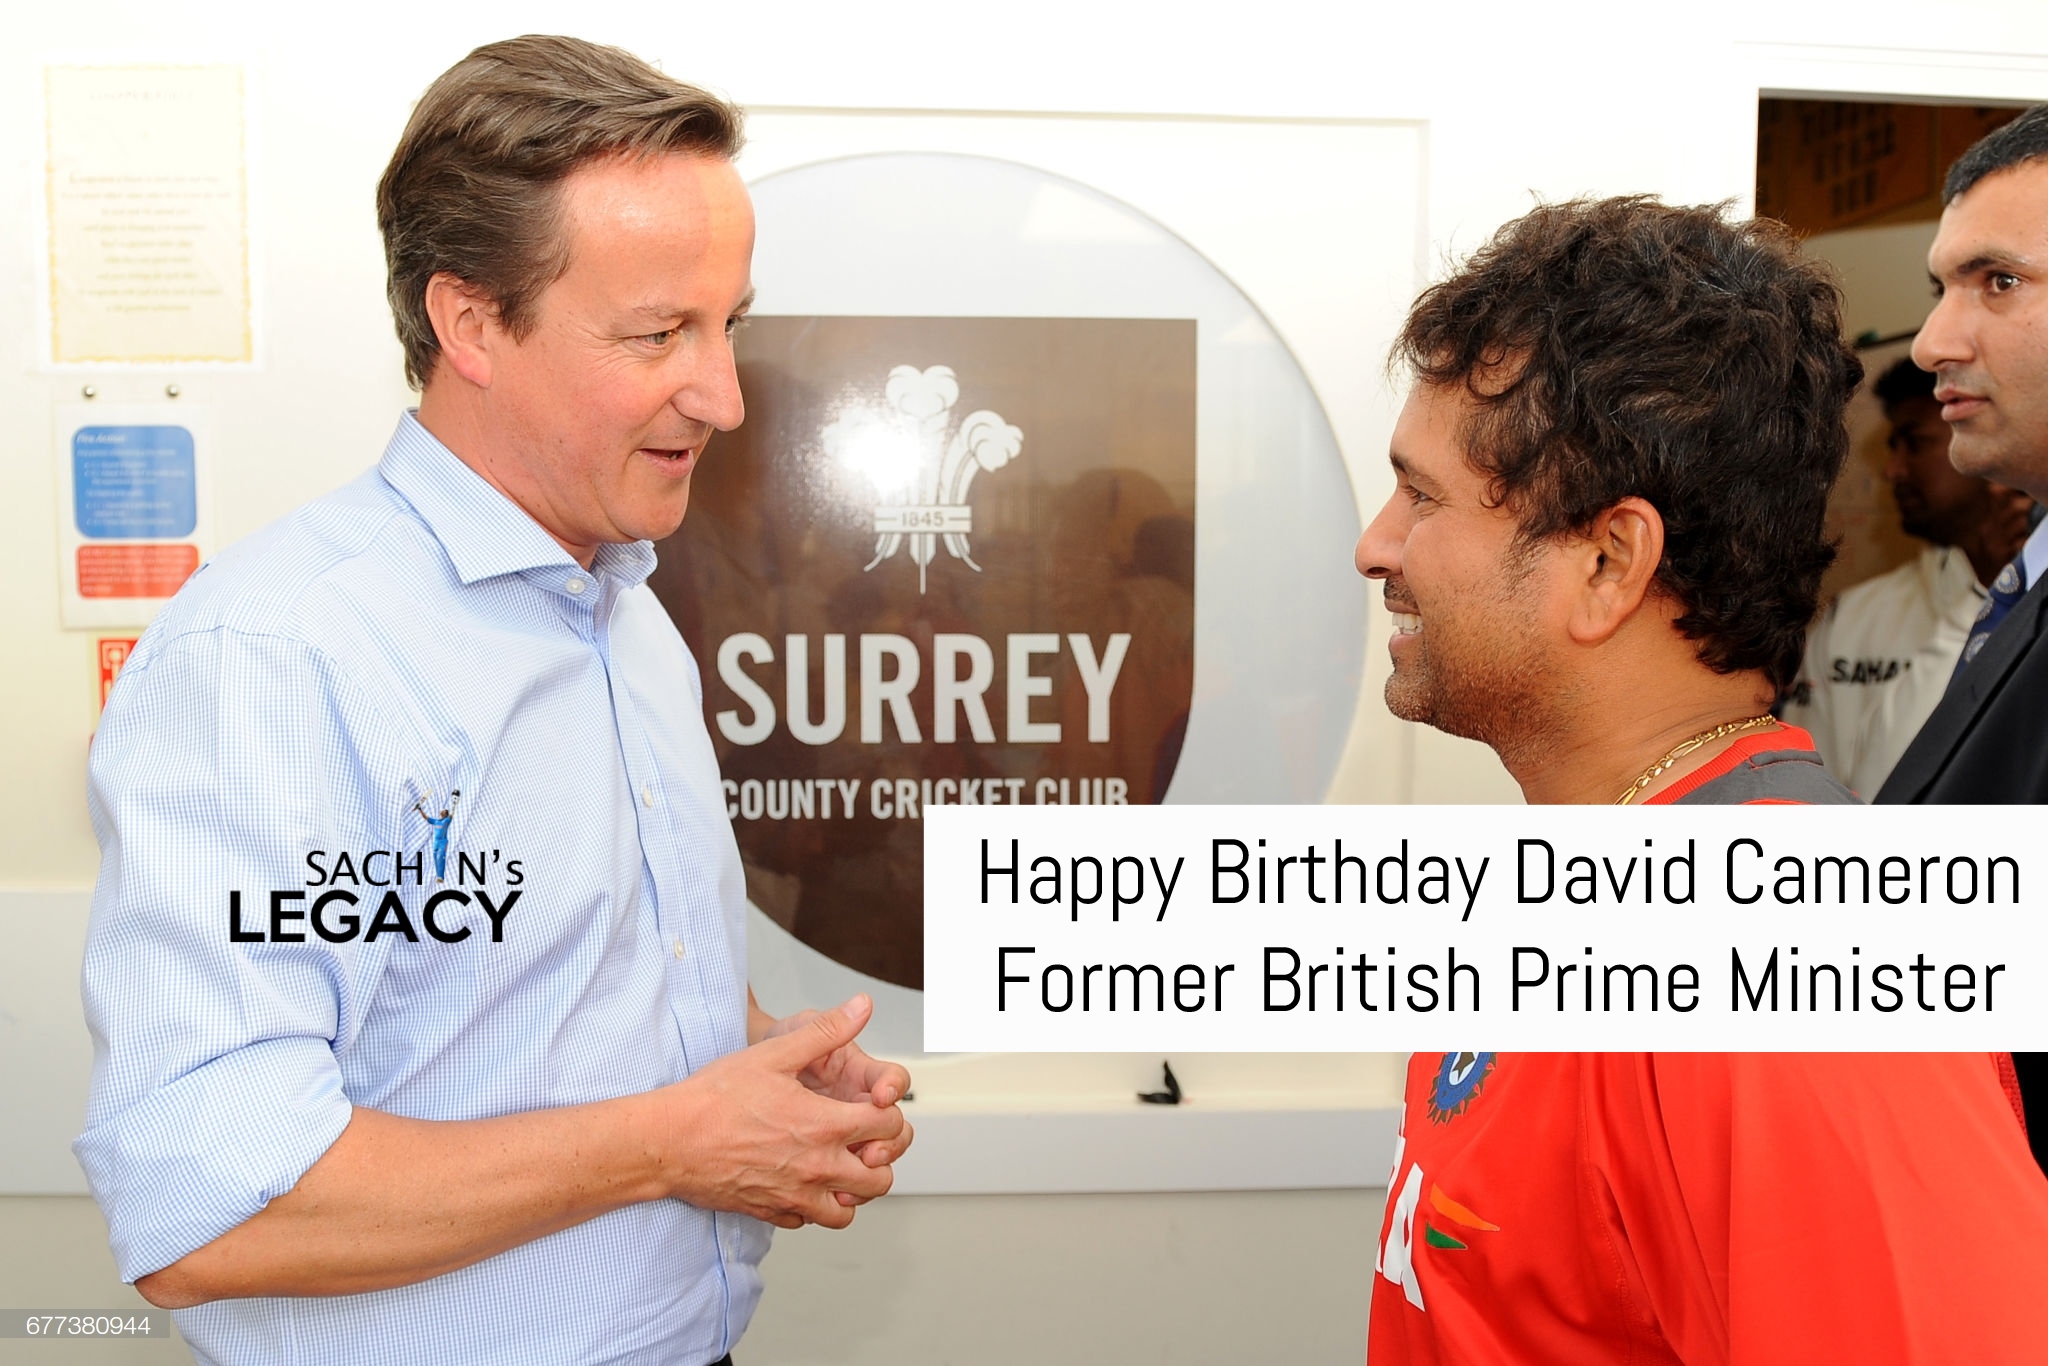 Wishing former British Prime Minister a very happy birthday 